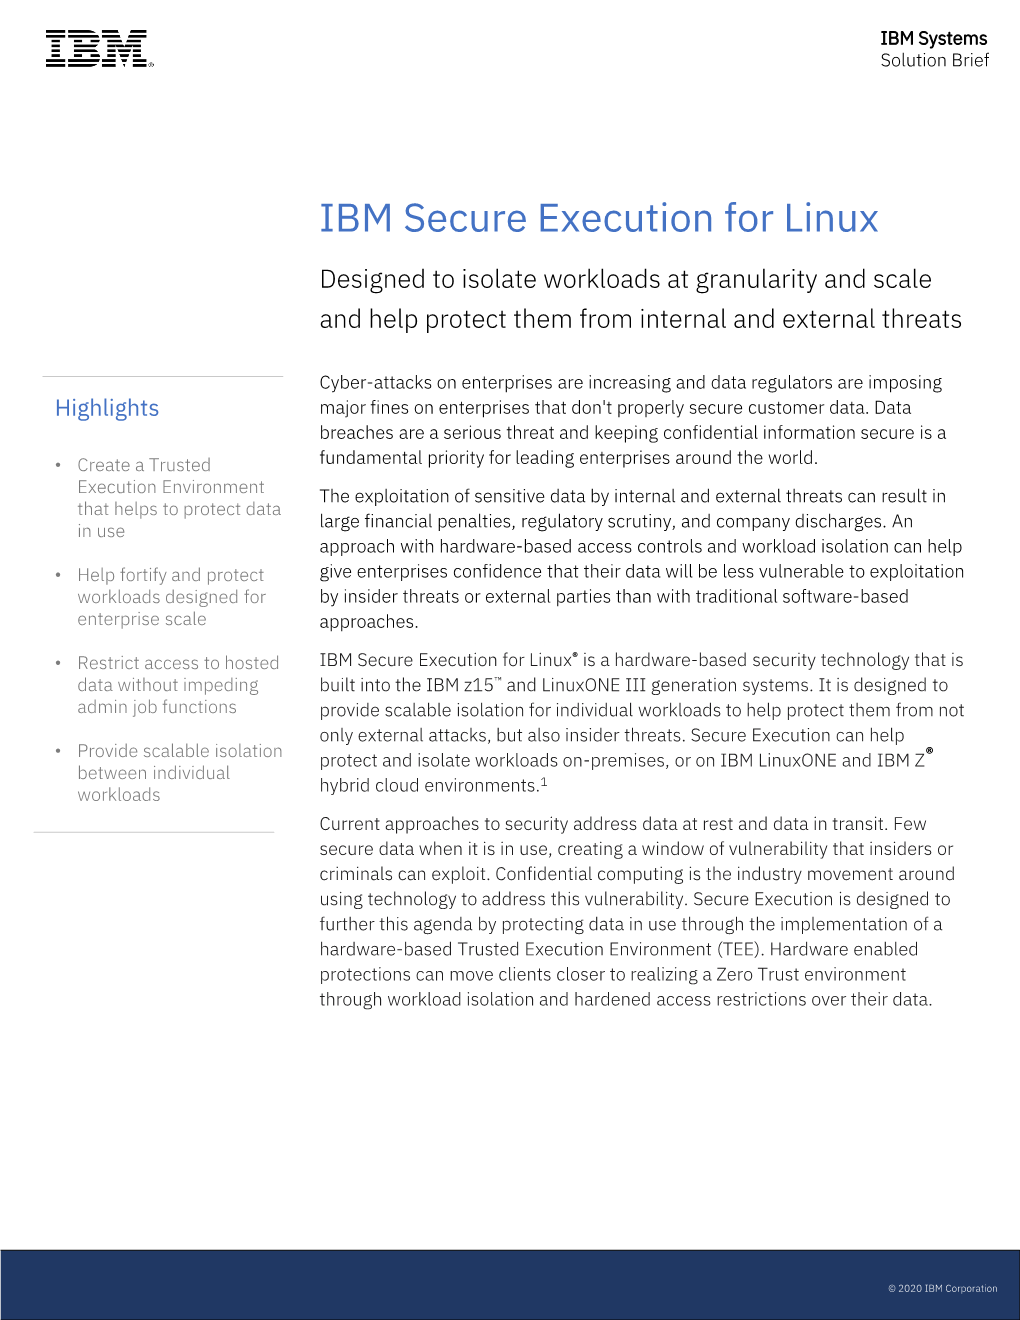 IBM Secure Execution for Linux